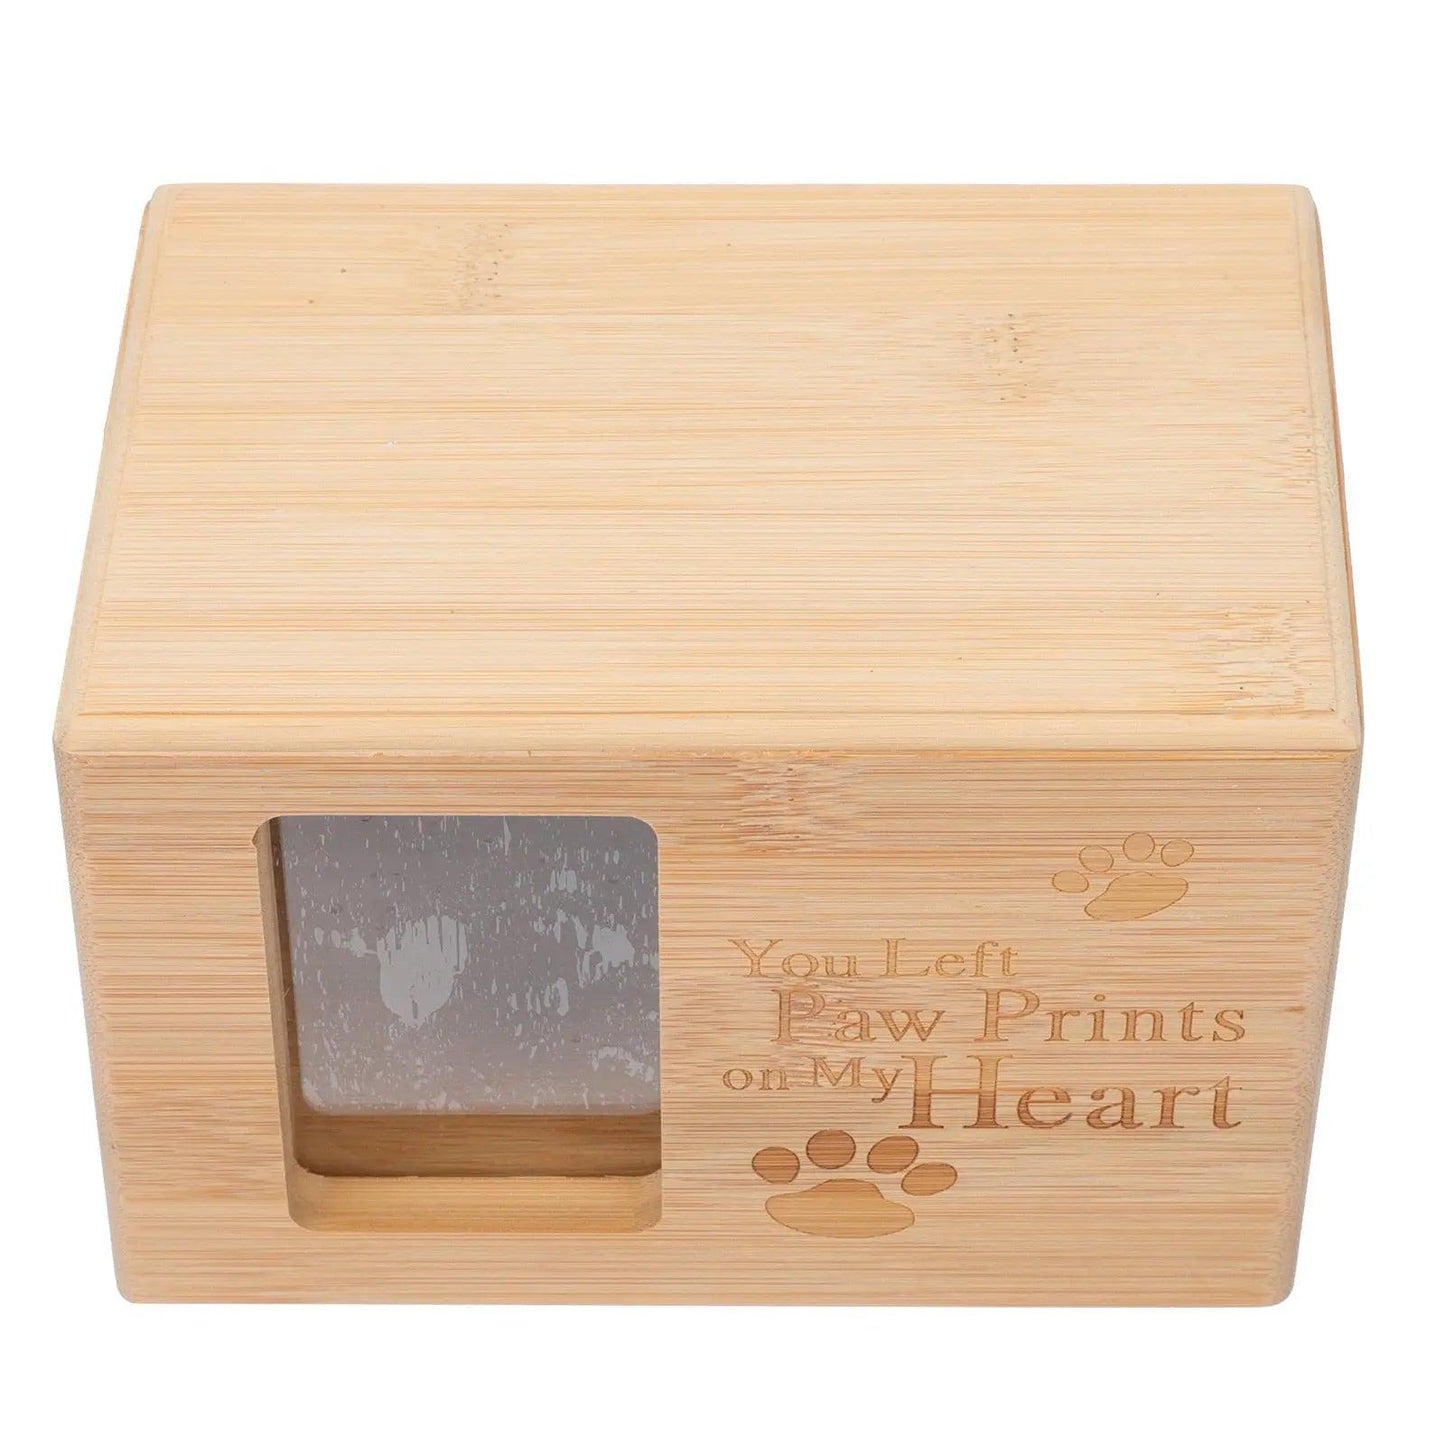 Dashuri Pet Ashes Urn-Pet Urn for Ashes-Cremation Urns- The cremation urns for ashes and keepsakes for ashes come in a variety of styles to suit most tastes, decor and different volumes of funeral ashes.